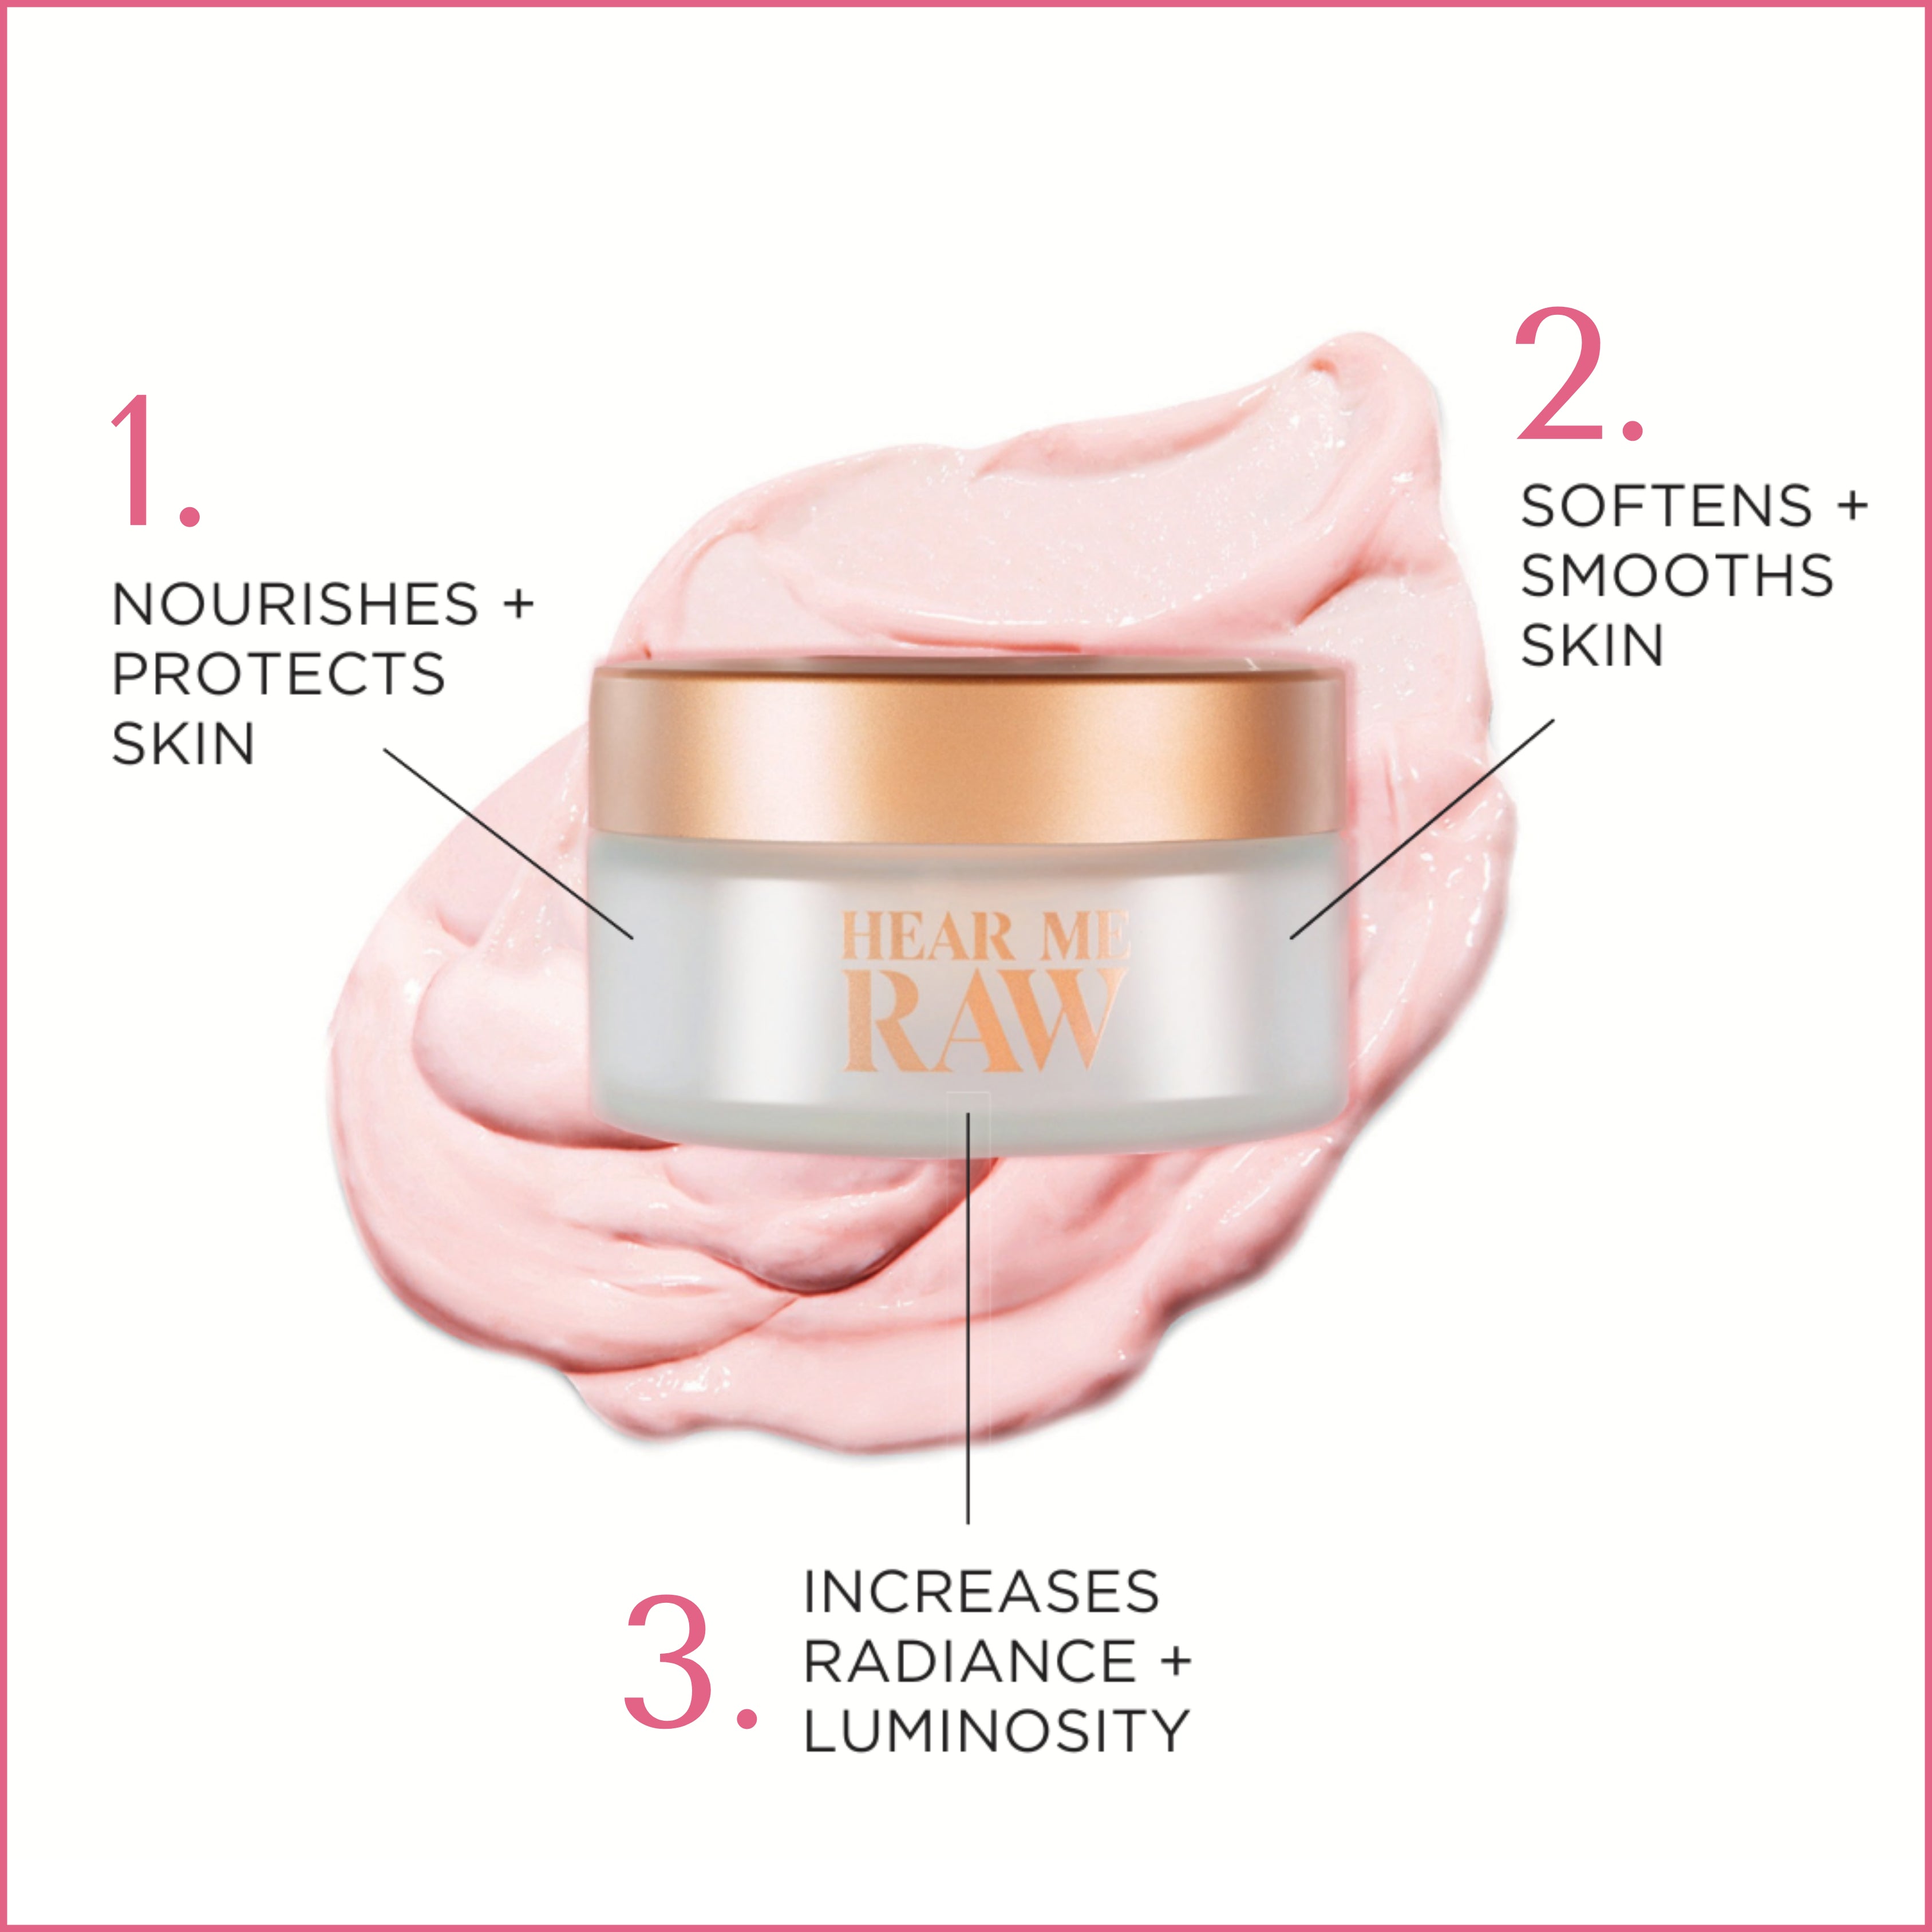 The key ingredients in Hear Me Raw The Hydrator